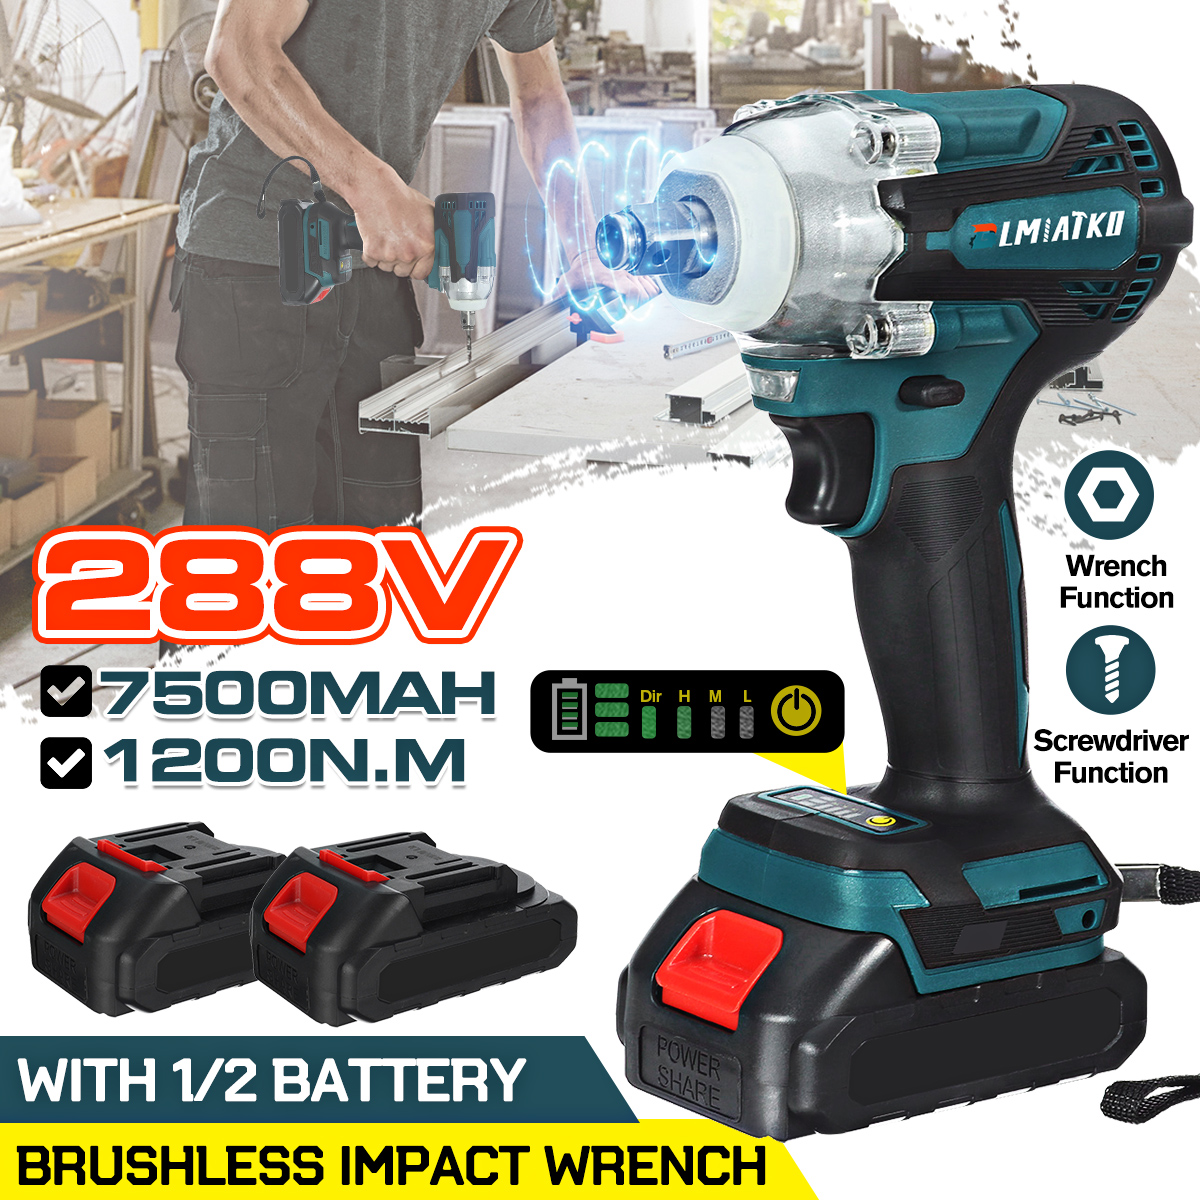 4-Speed-Brushless-Cordless-Electric-Impact-Wrench-with-Battery-1200NM-Rechargeable-12inch-Torque-Wre-1843508-2